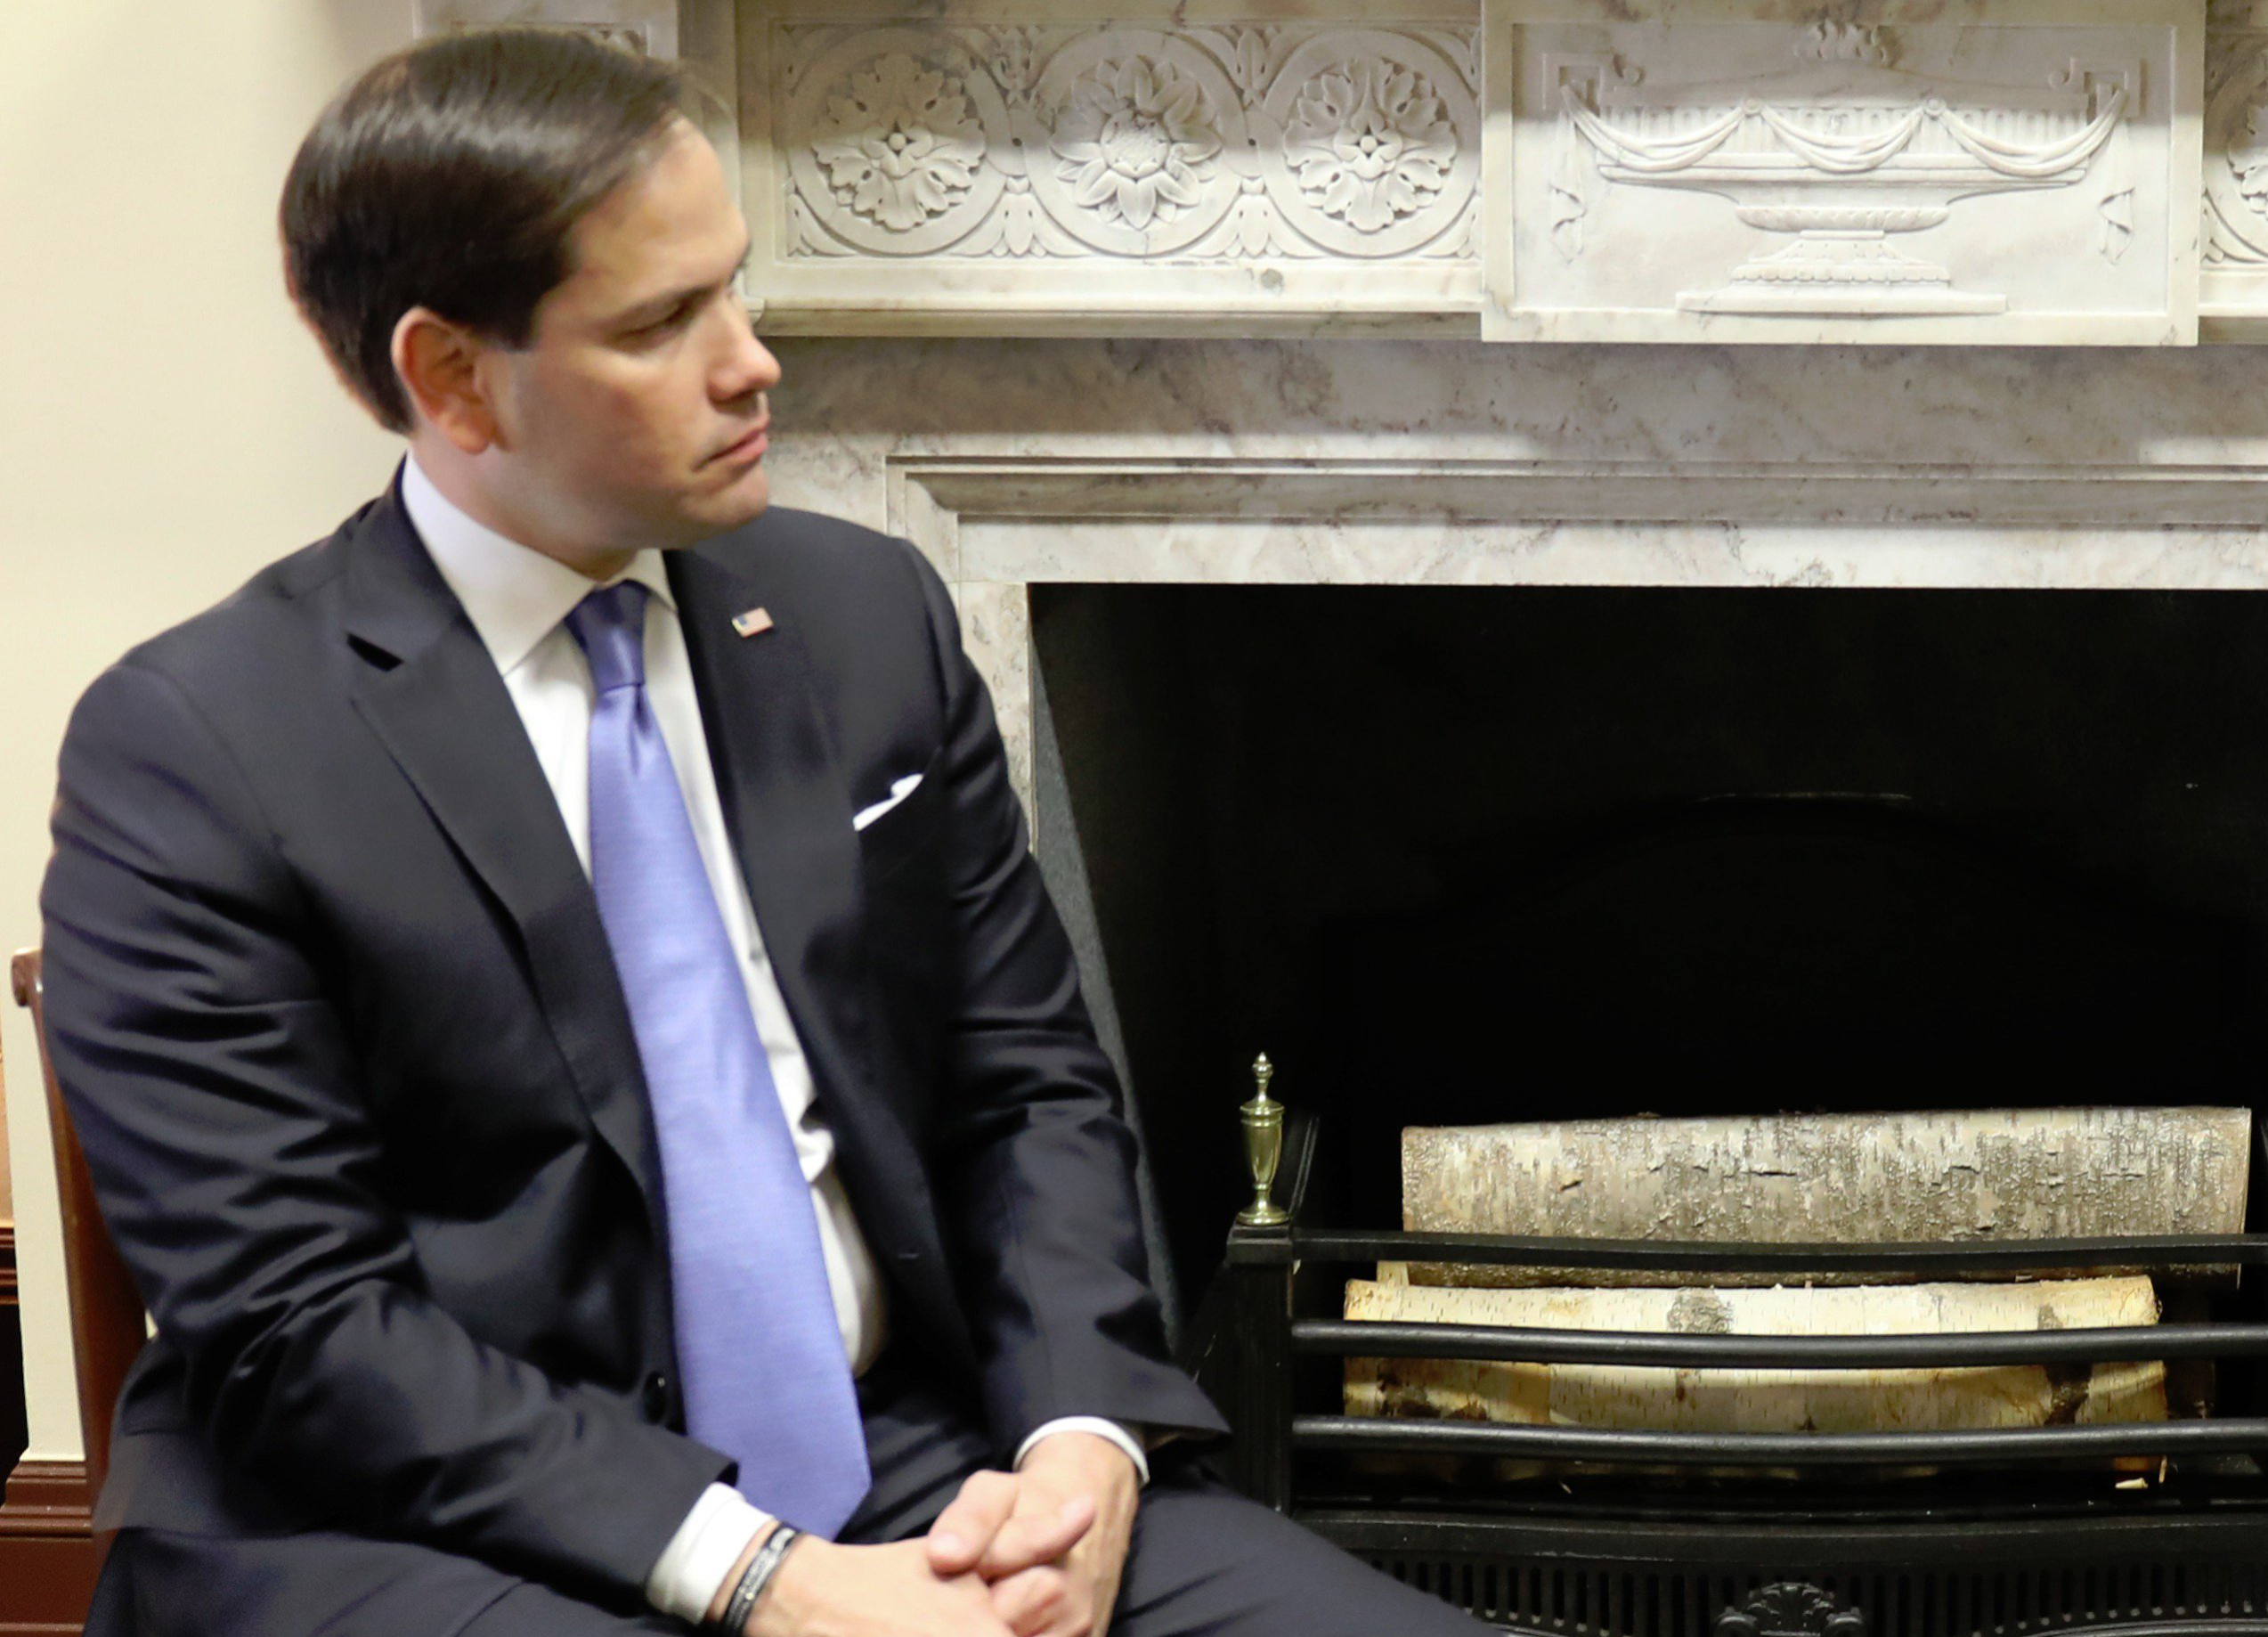 Senator Marco Rubio, R-Florida, seated next to a wood-burning open-heart fireplace with birch logs